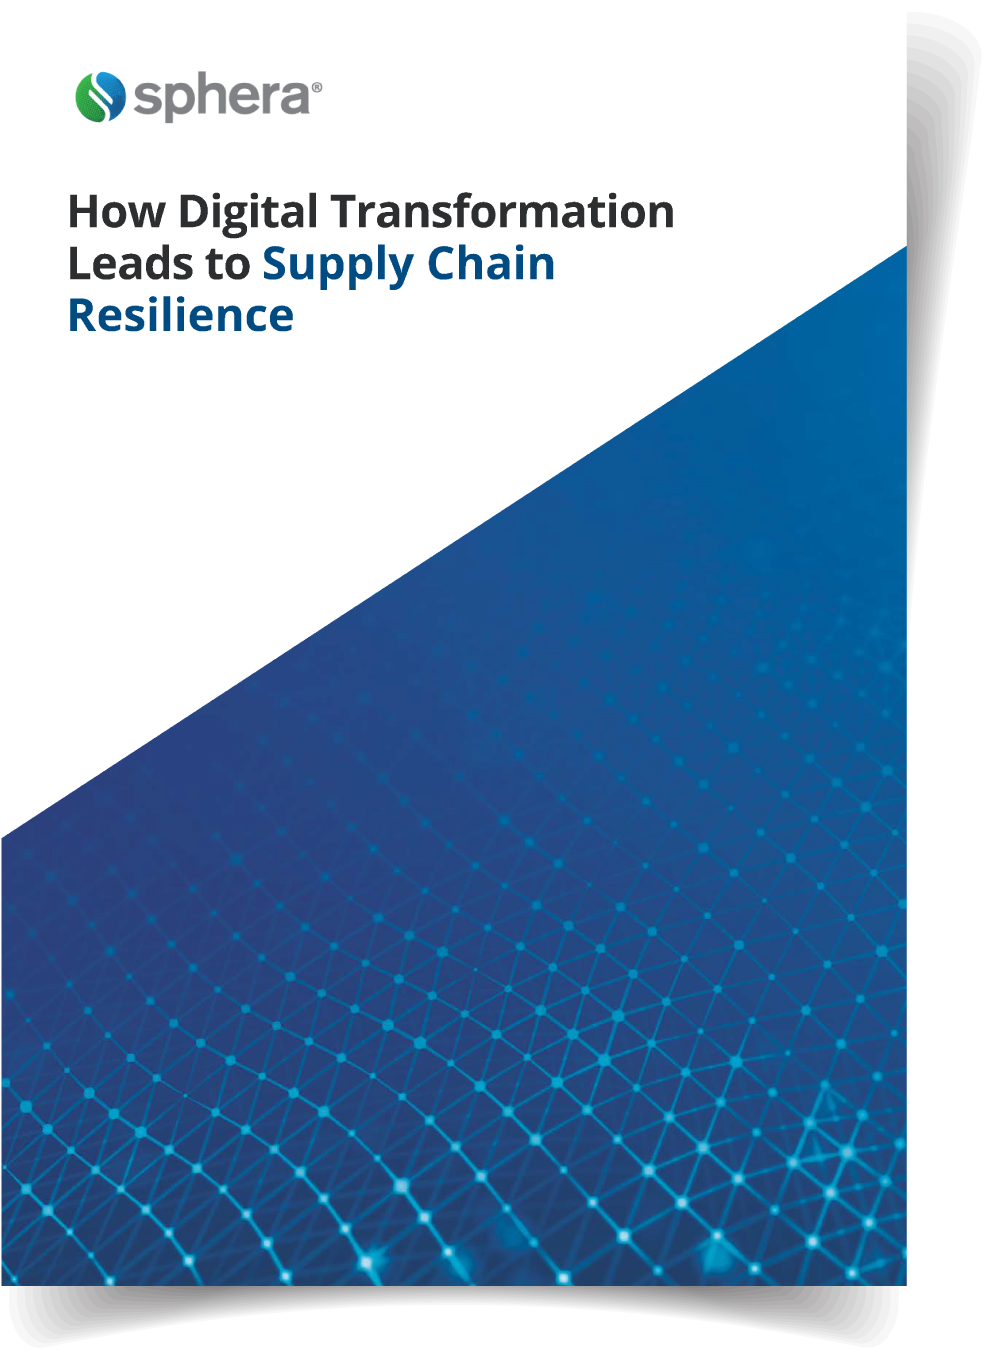 How Digital Transformation Leads to Supply Chain Resilience